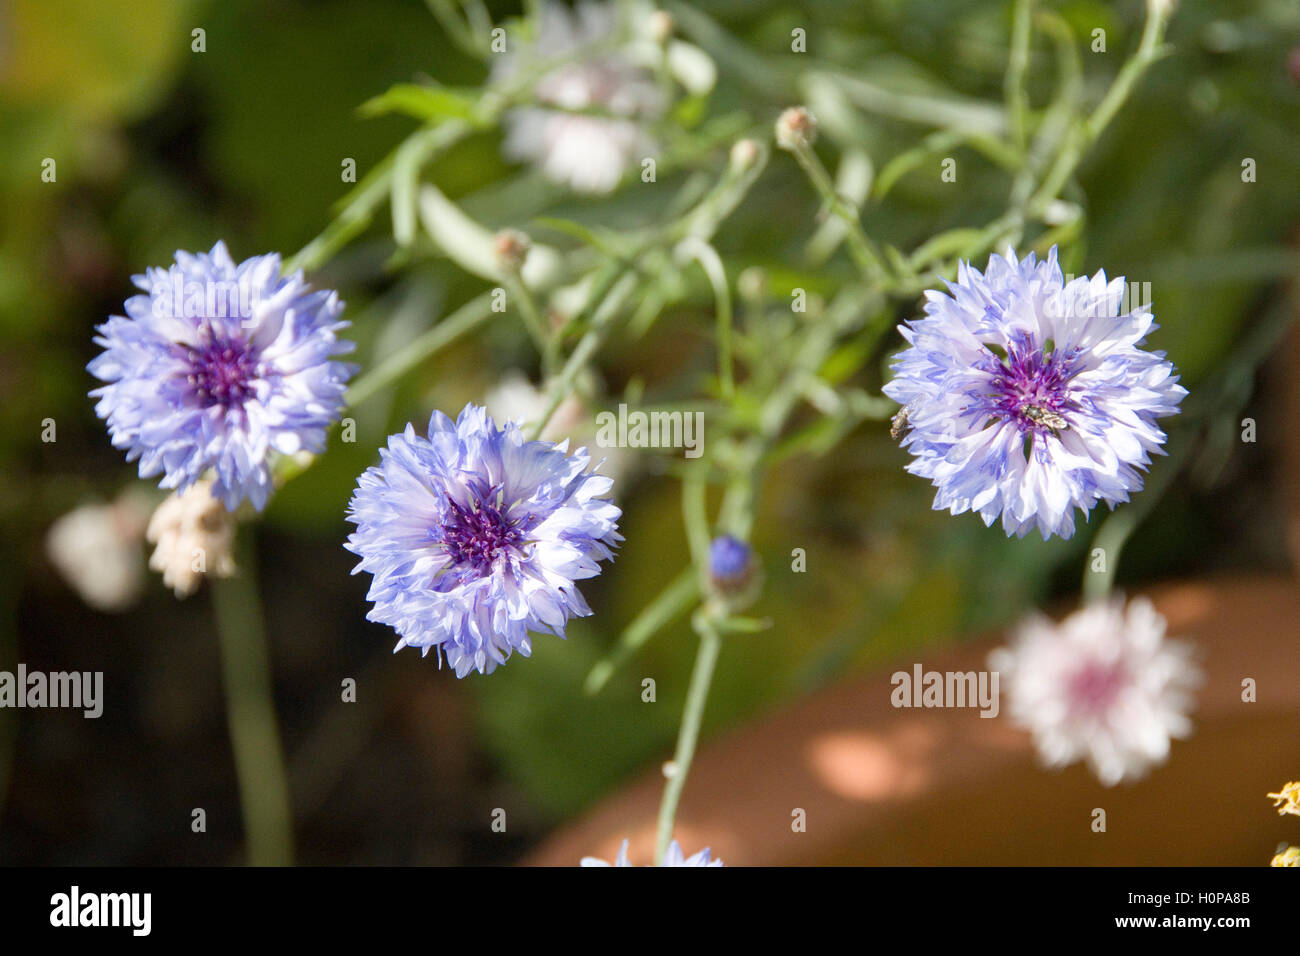 Close up on the blue flowers of a Cornflower, England Stock Photo